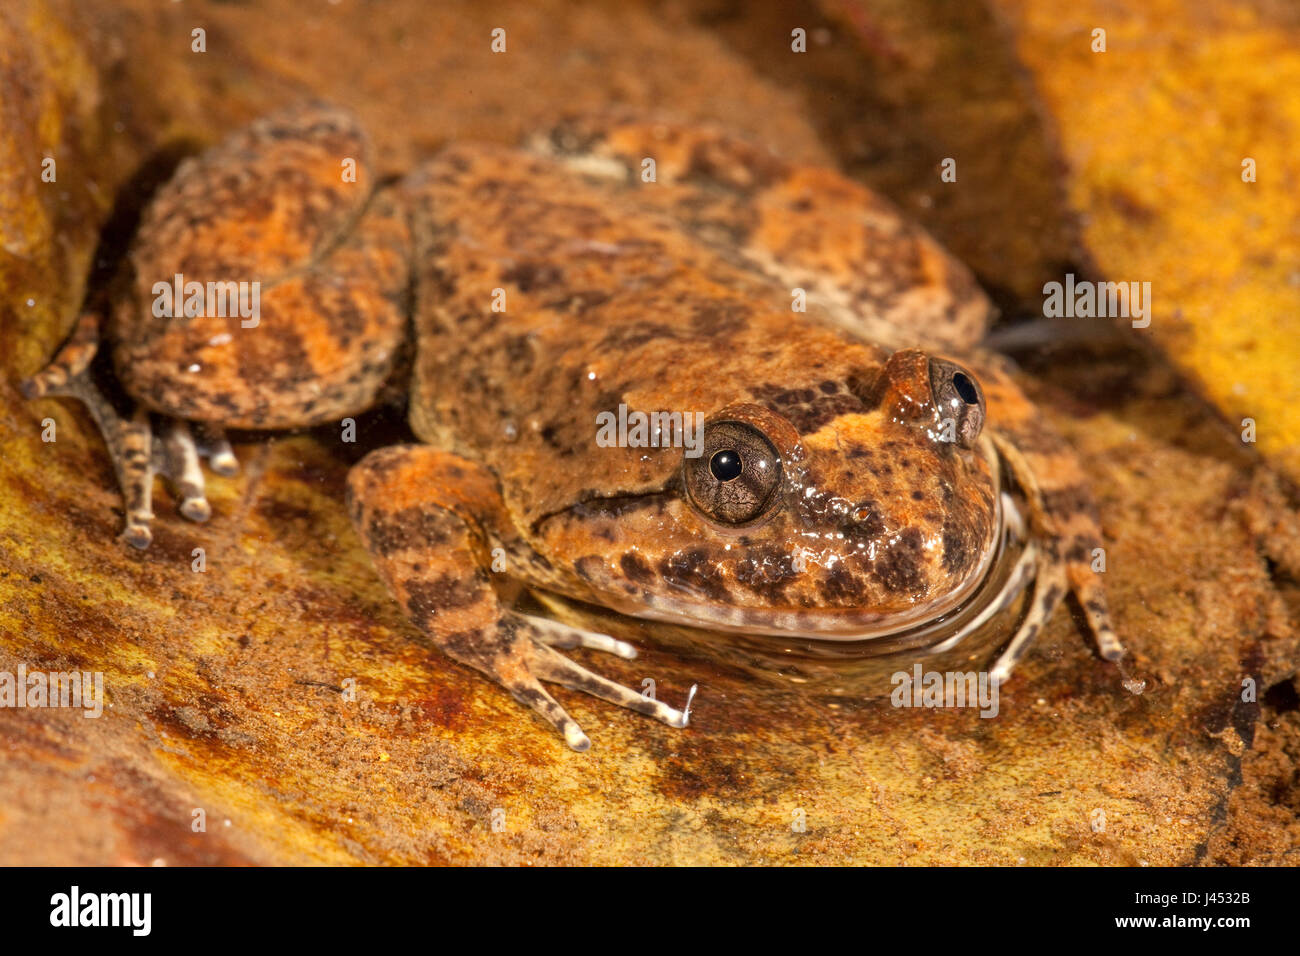 photo of a Kuhl's creek frog Stock Photo